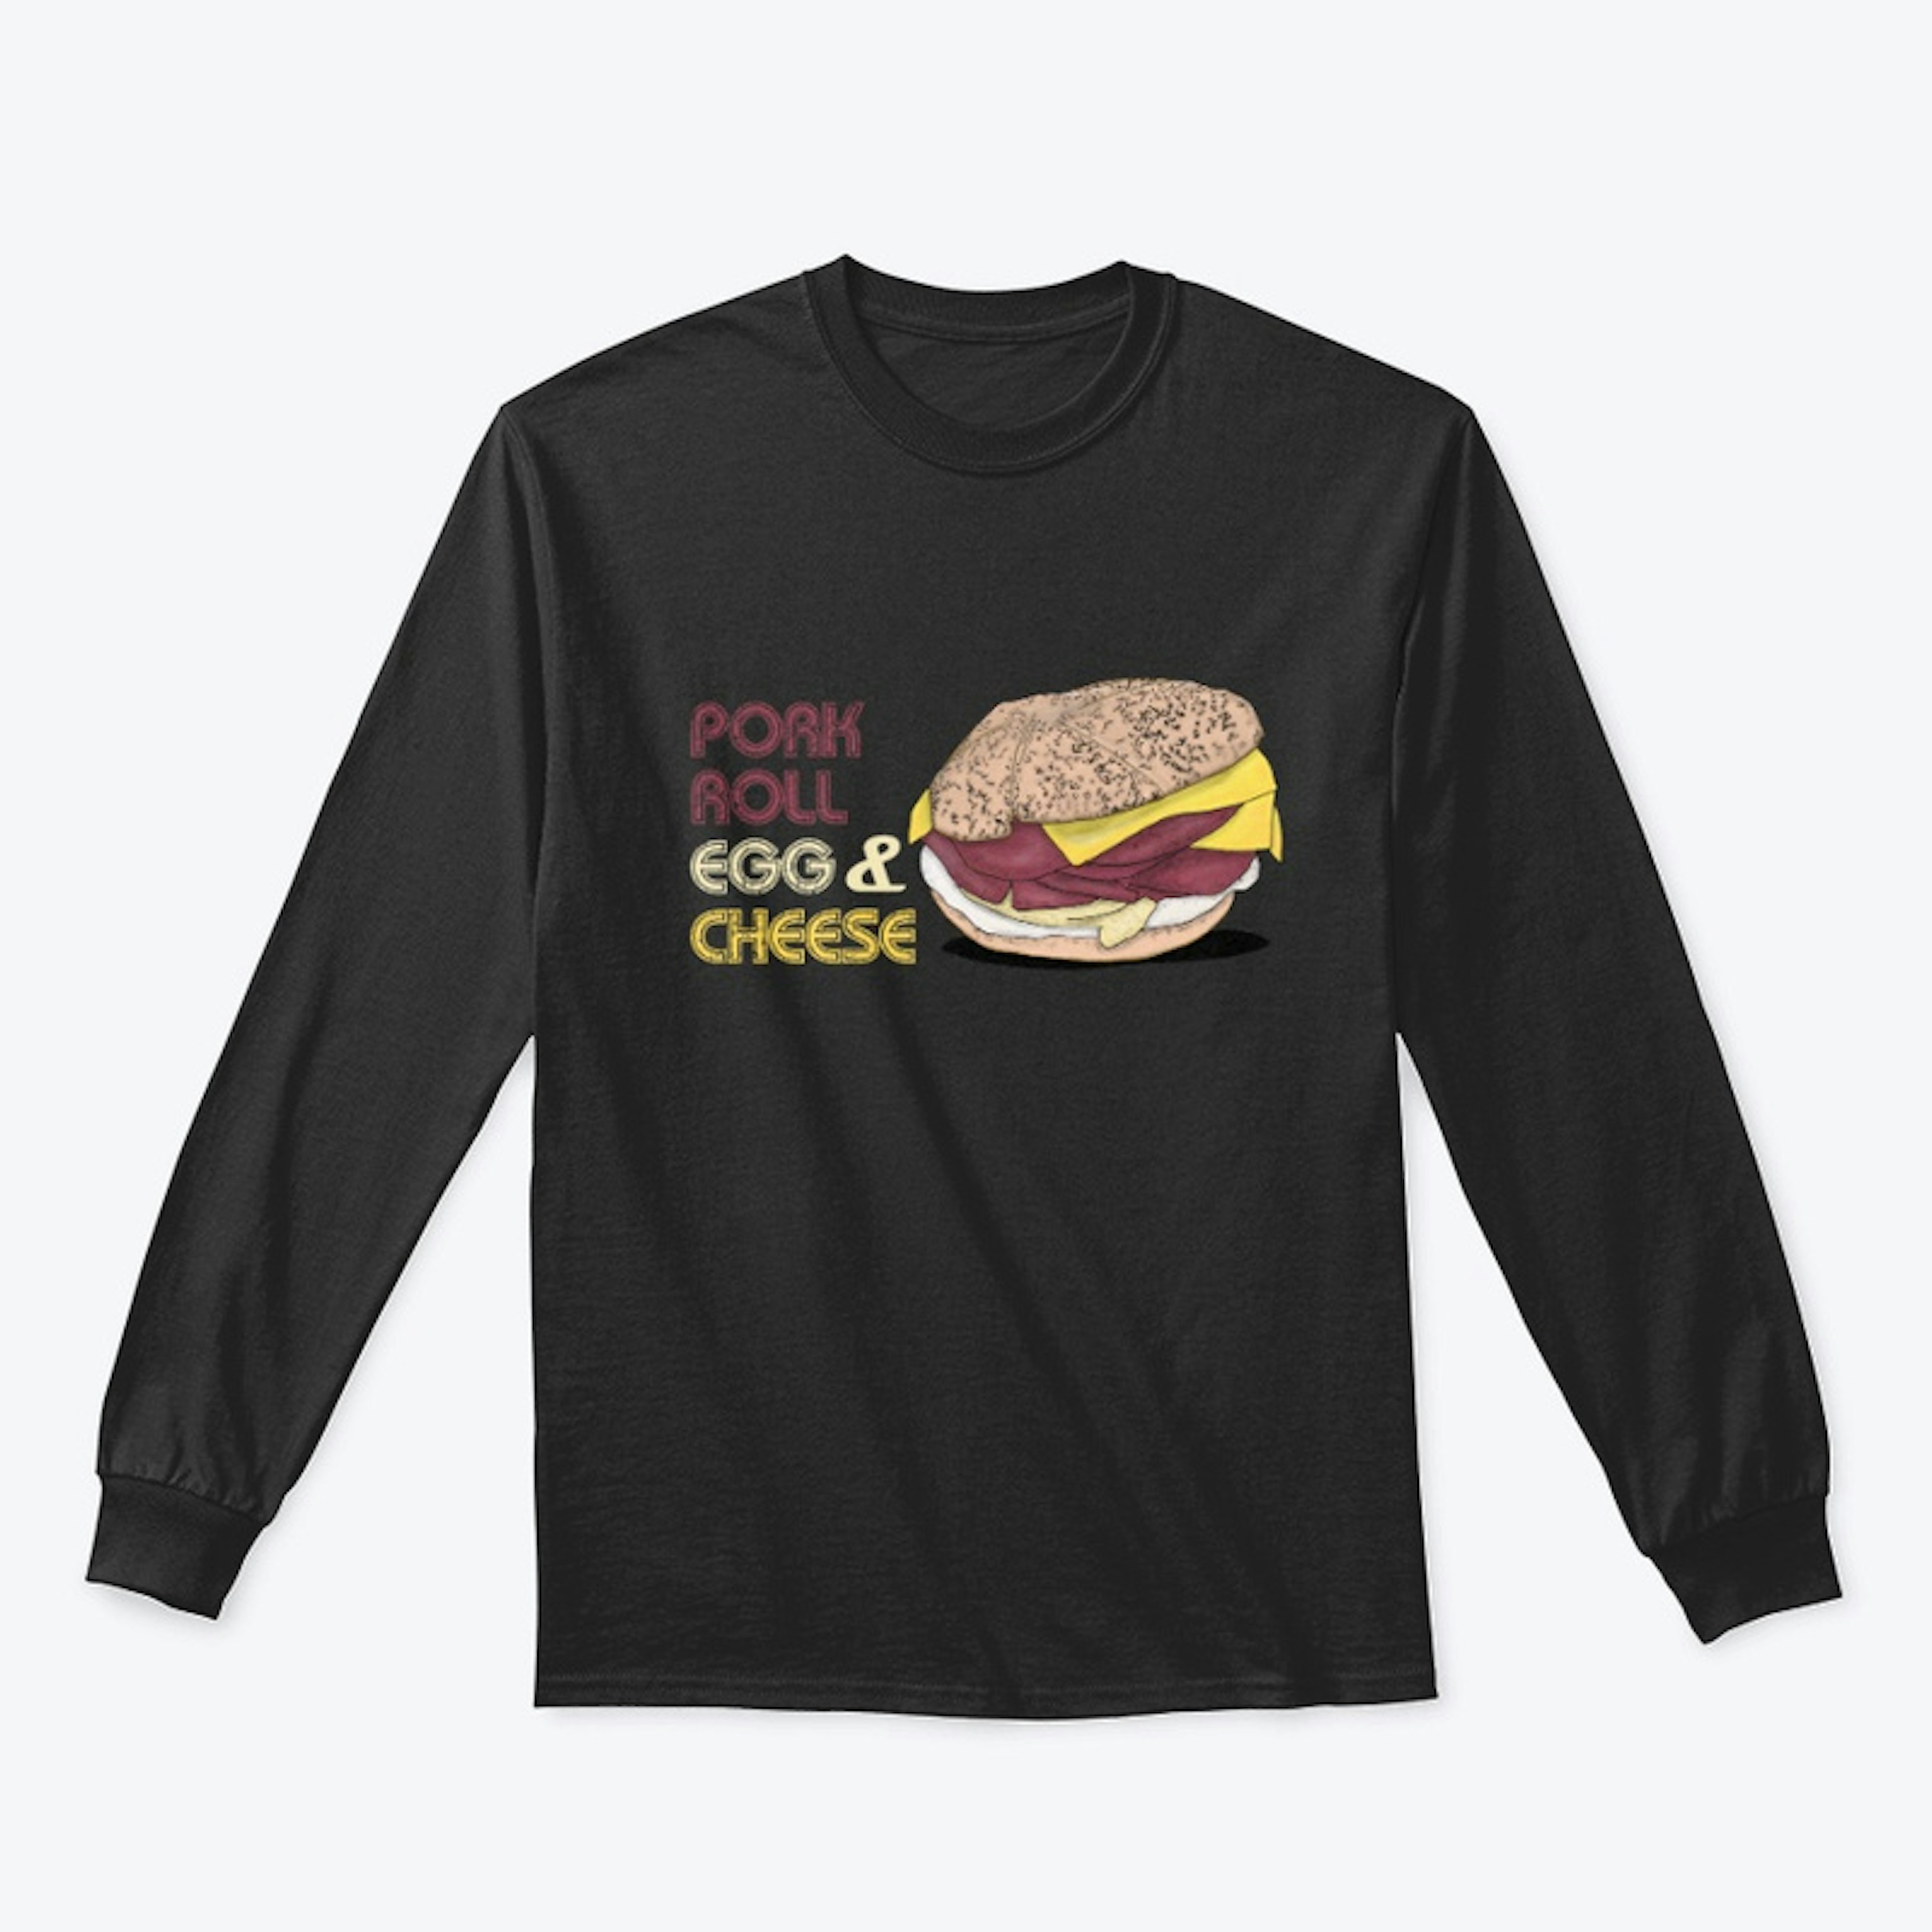 Pork Roll Egg and Cheese, Jerseys Best